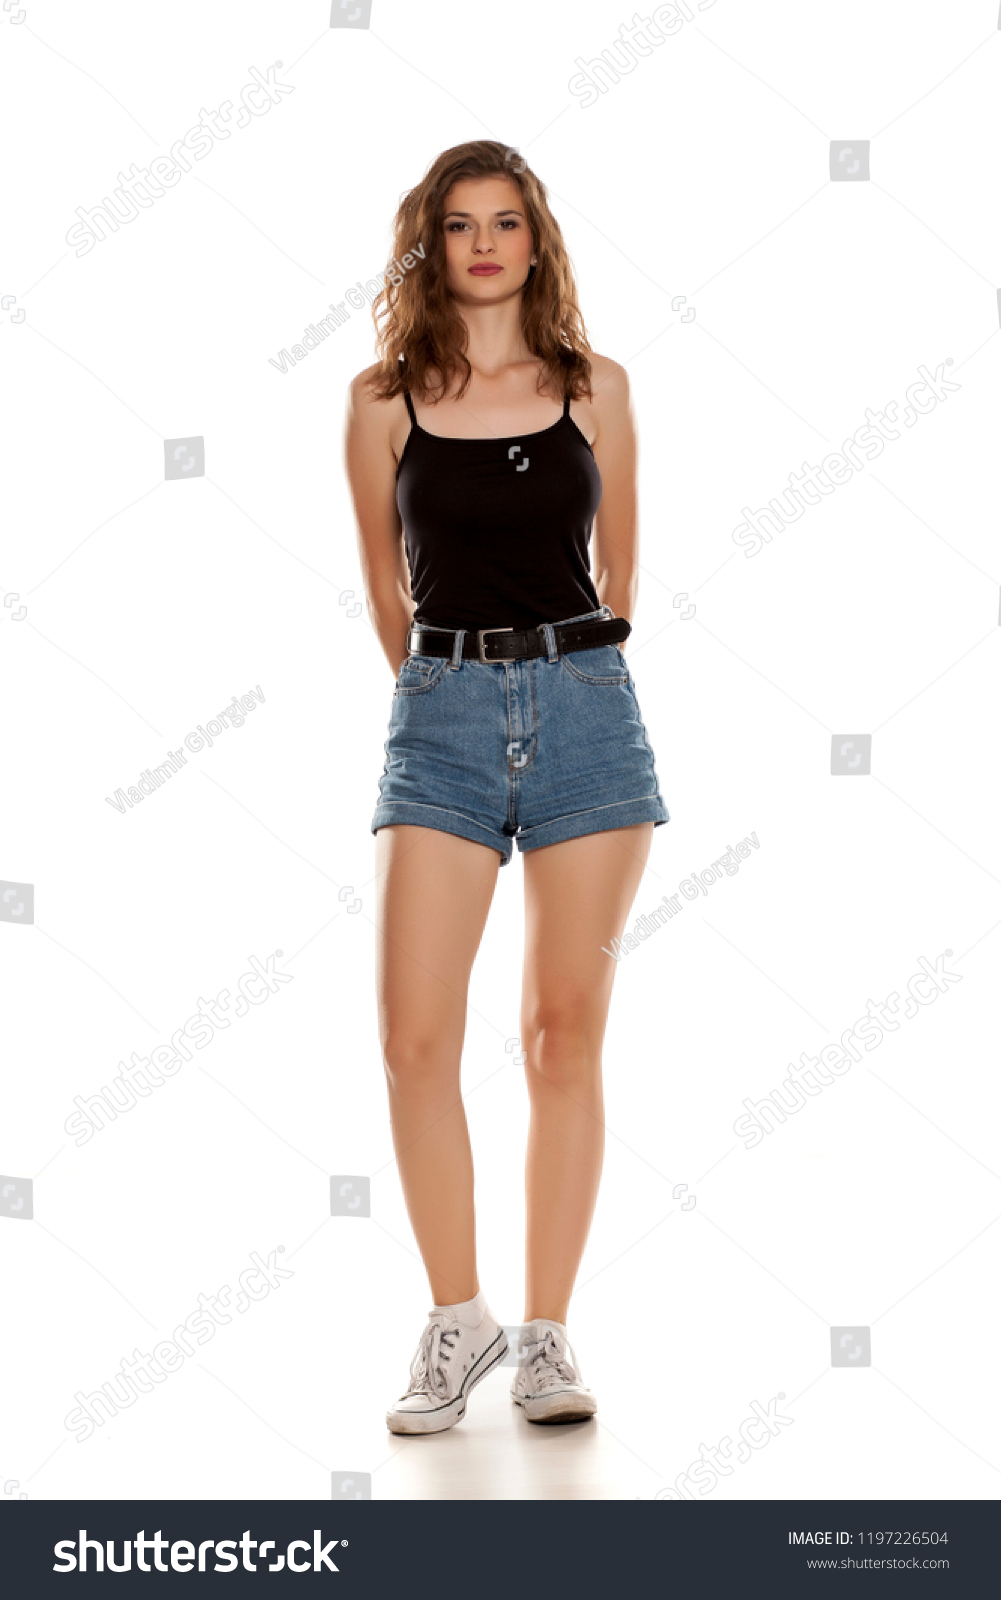 Young pretty woman in short jeans standing on white background #1197226504